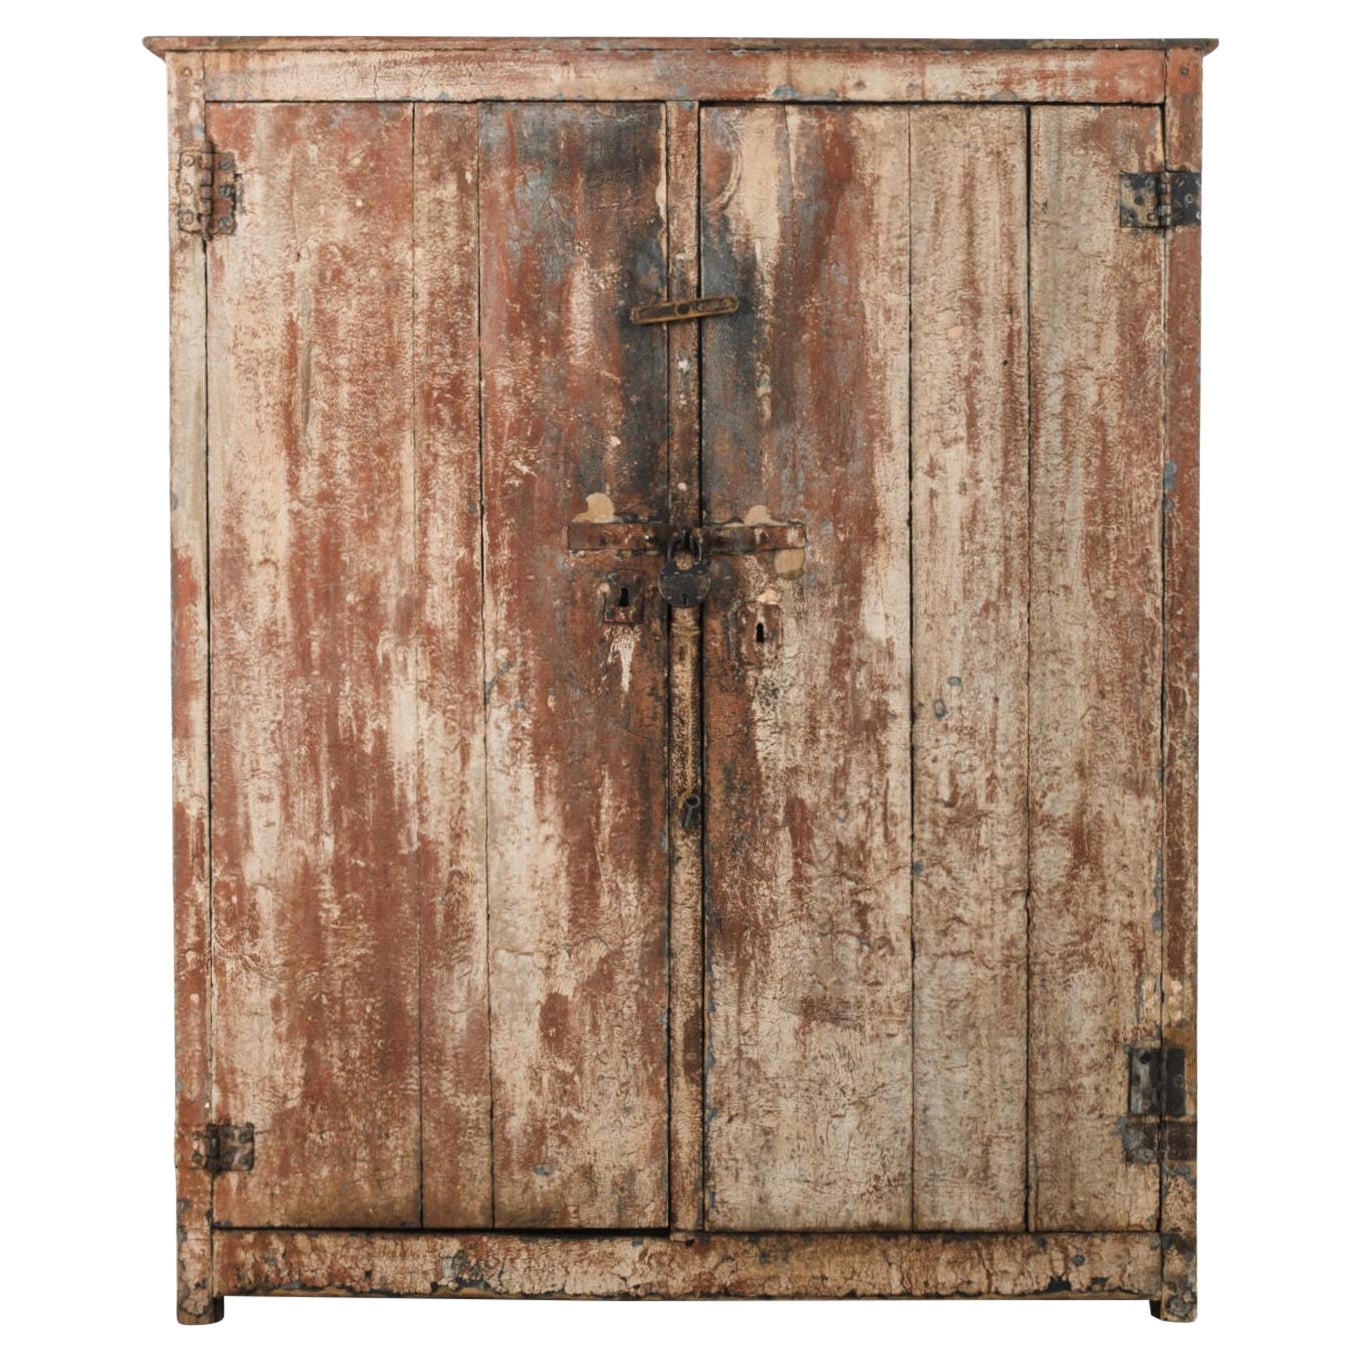 1920s Rustic Belgian Wooden Patinated Cabinet